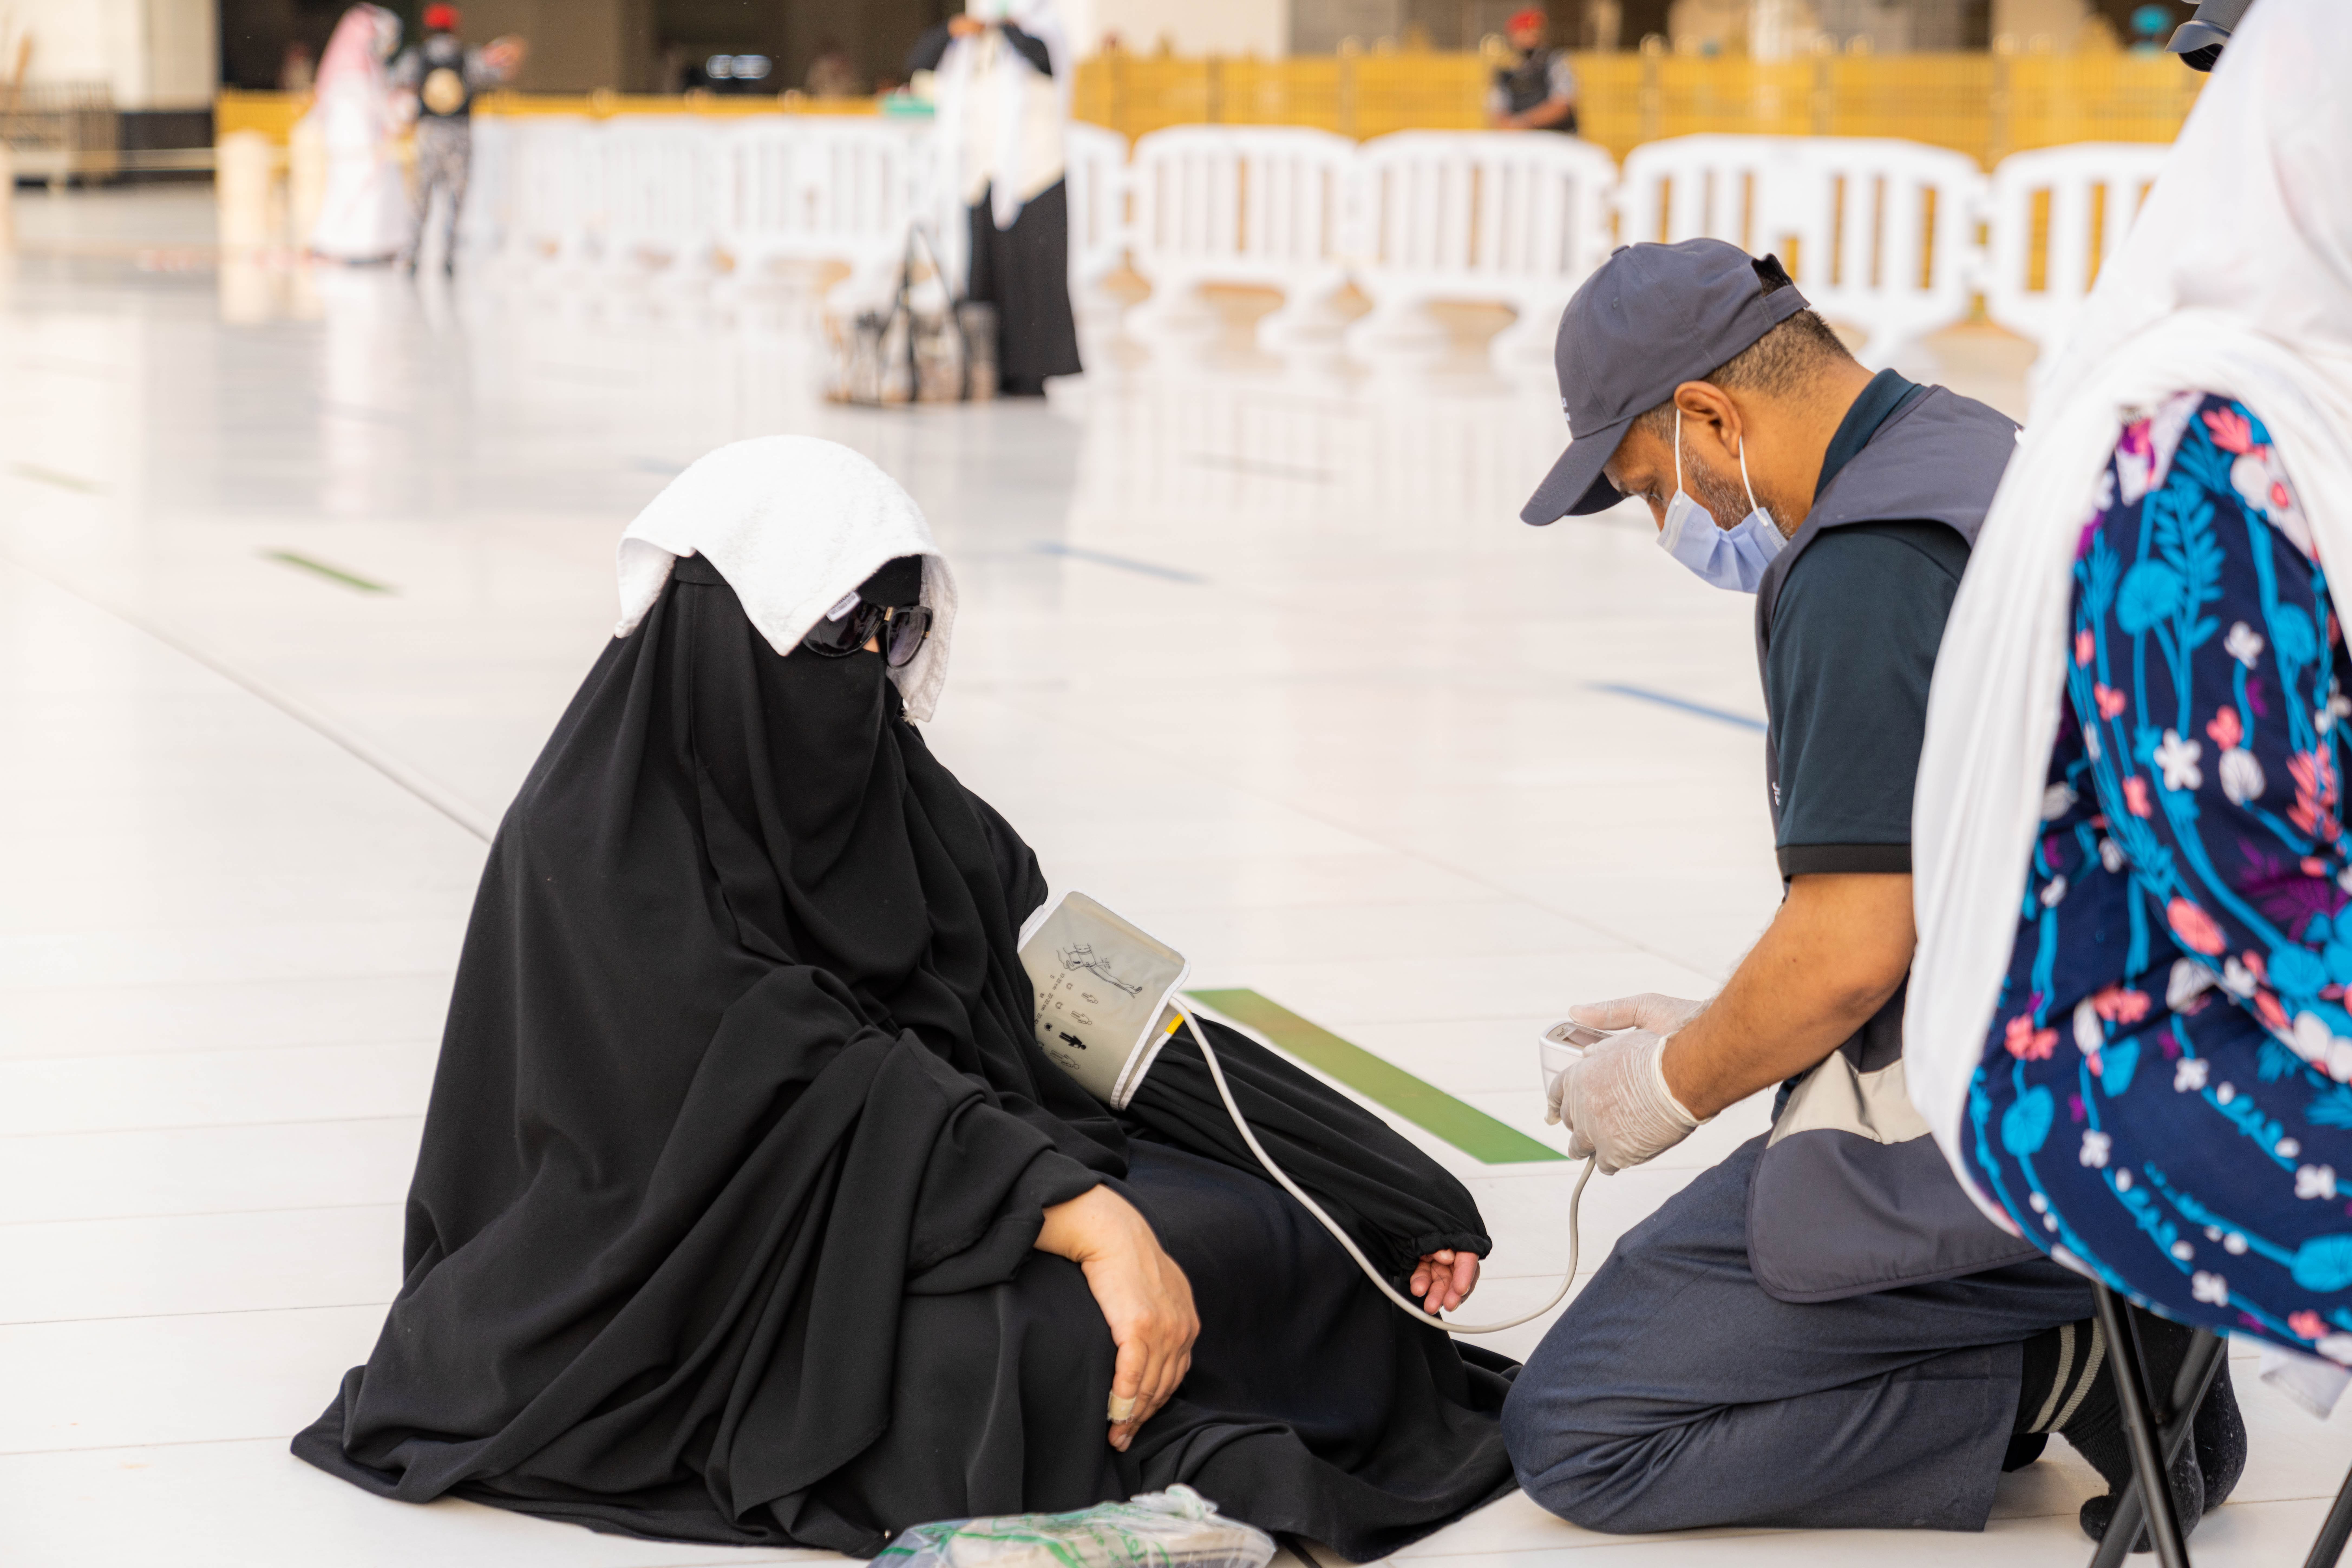 MOH: 1,500 Health Volunteers provide Services to pilgrims this Year under the Slogan “Sawaed Mulabiyah”